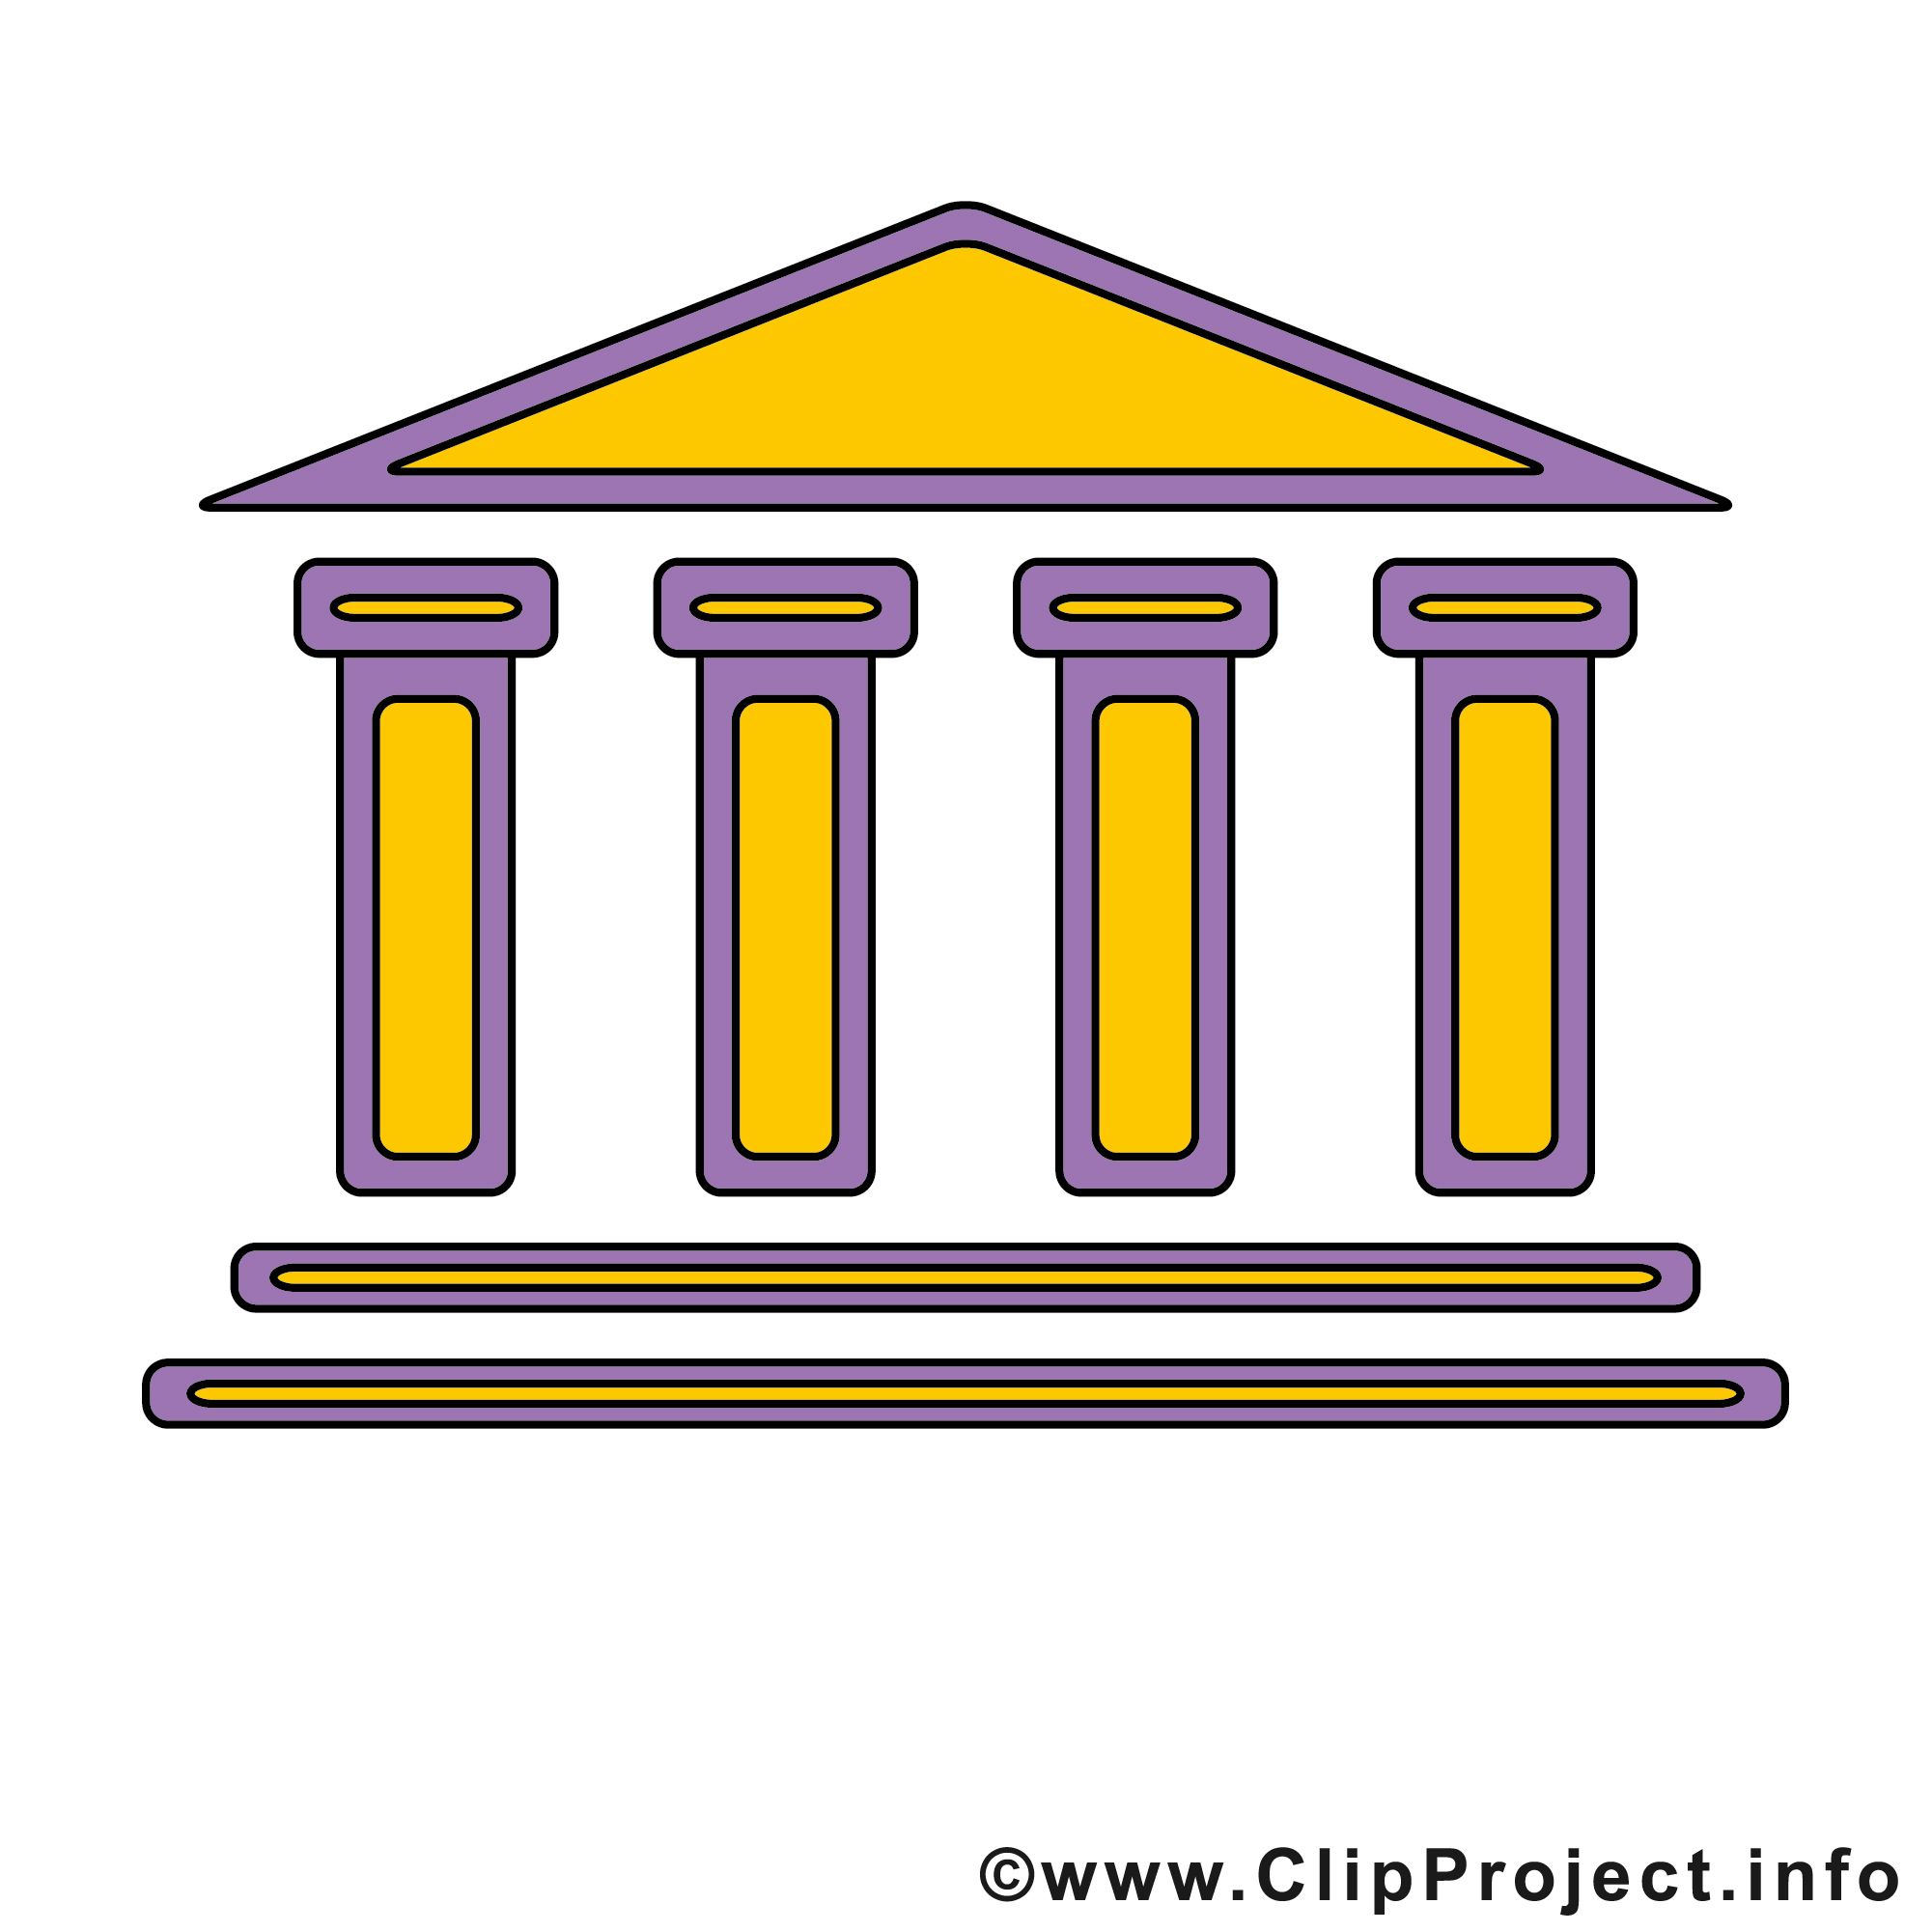 clip art images of bank - photo #25